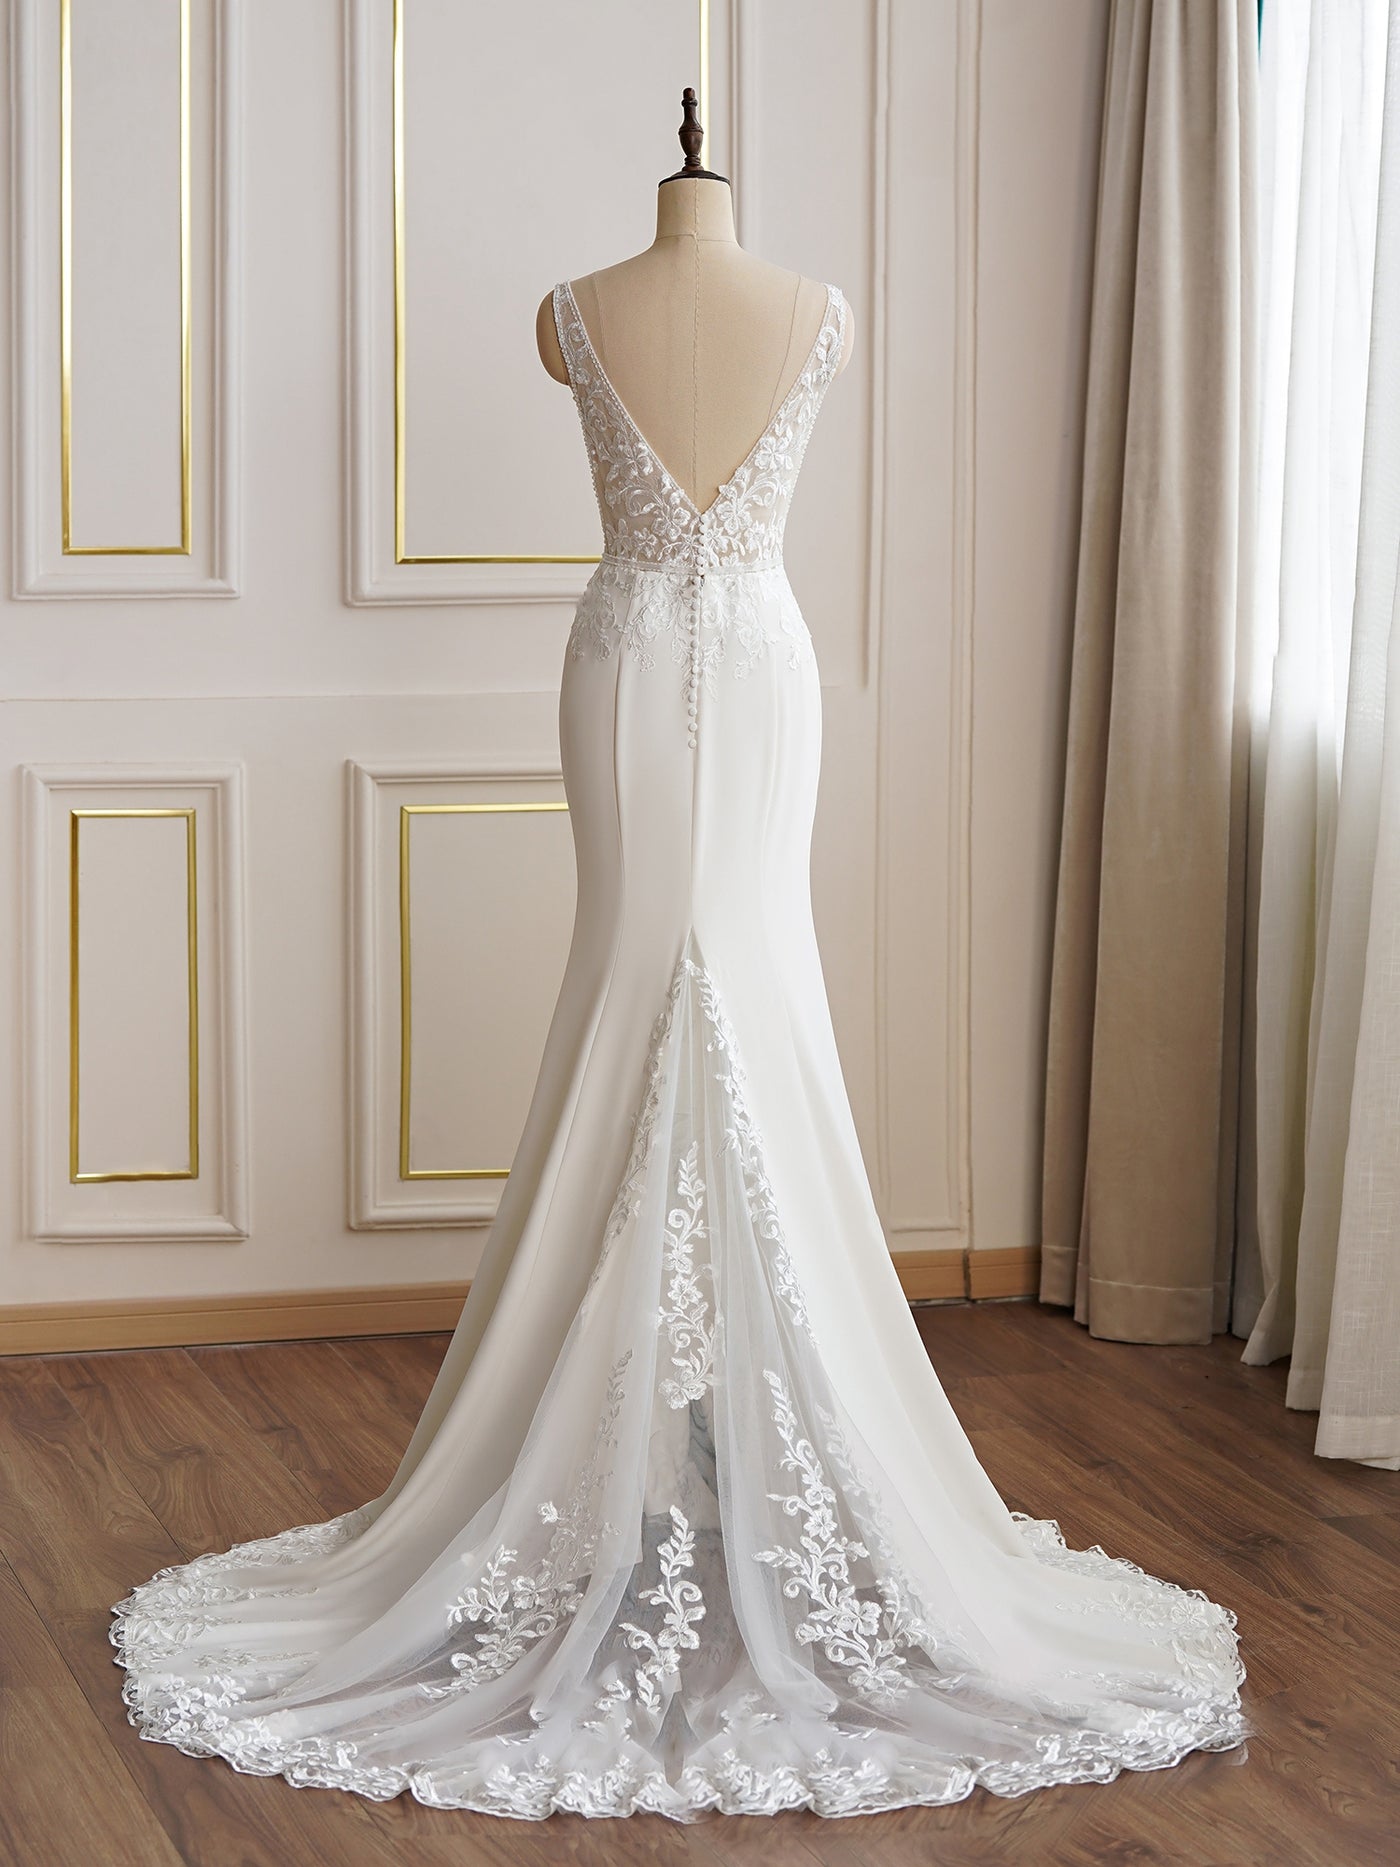 A white Beaded Lace Fit and Flare Bridal Gown with lace detailing and a long train, displayed on a mannequin in a Bergamot Bridal shop with elegant white paneling.